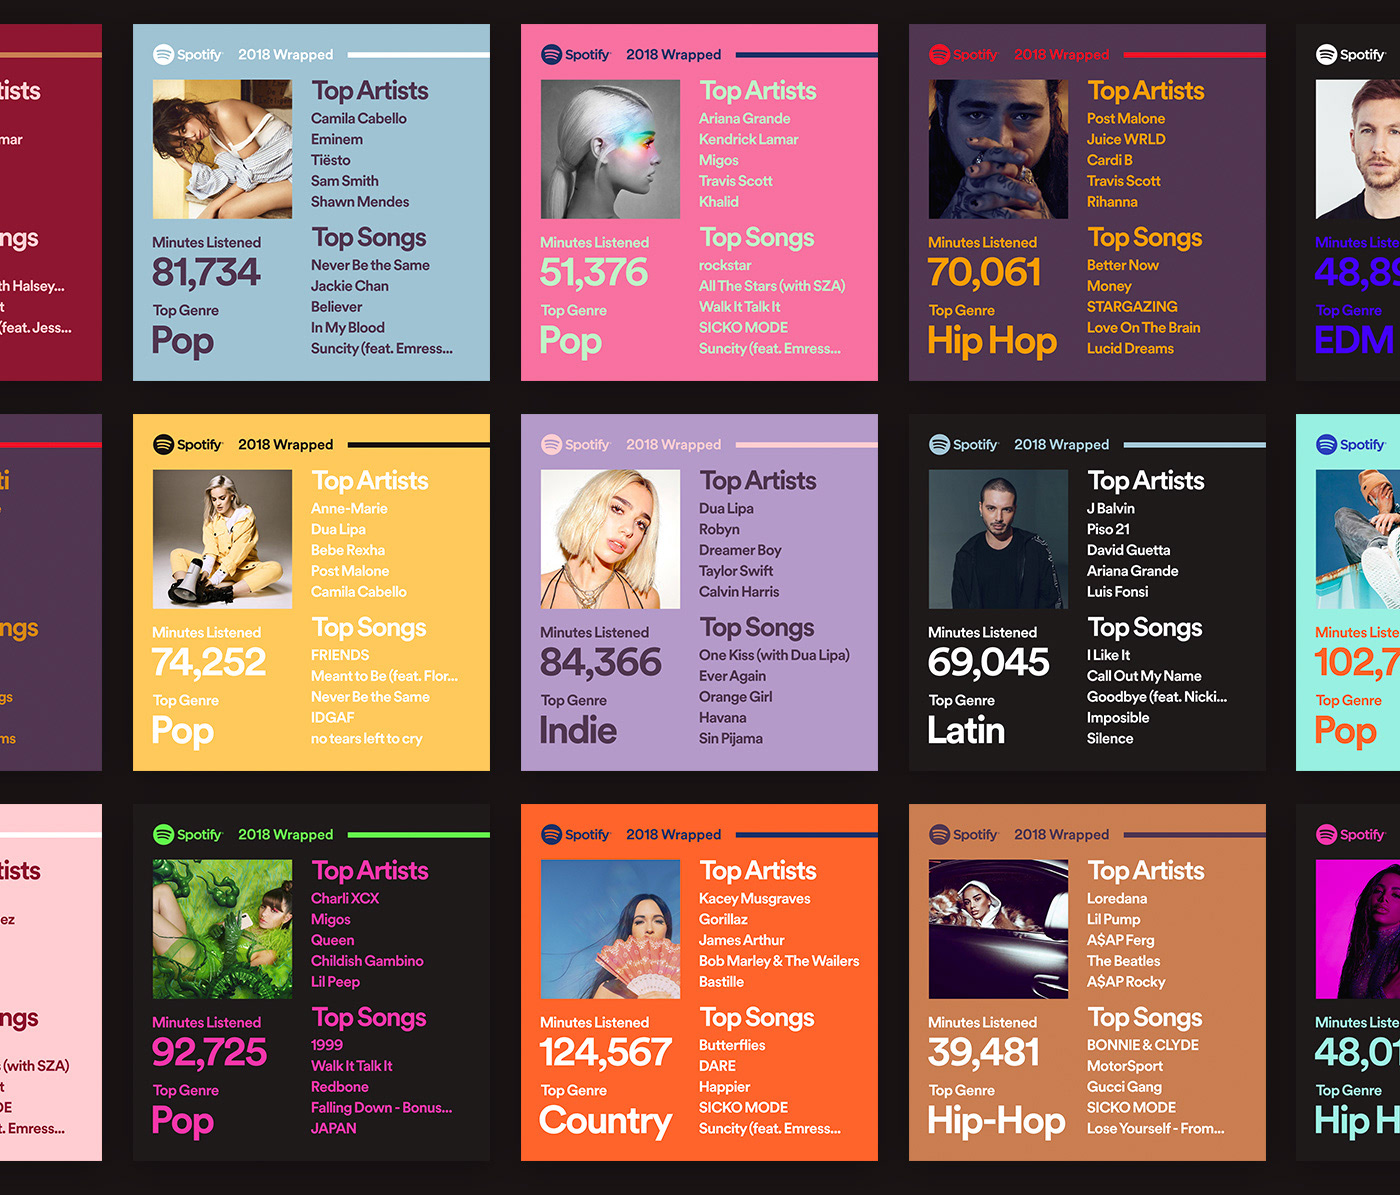 Color Inspiration: Spotify 2018 Wrapped